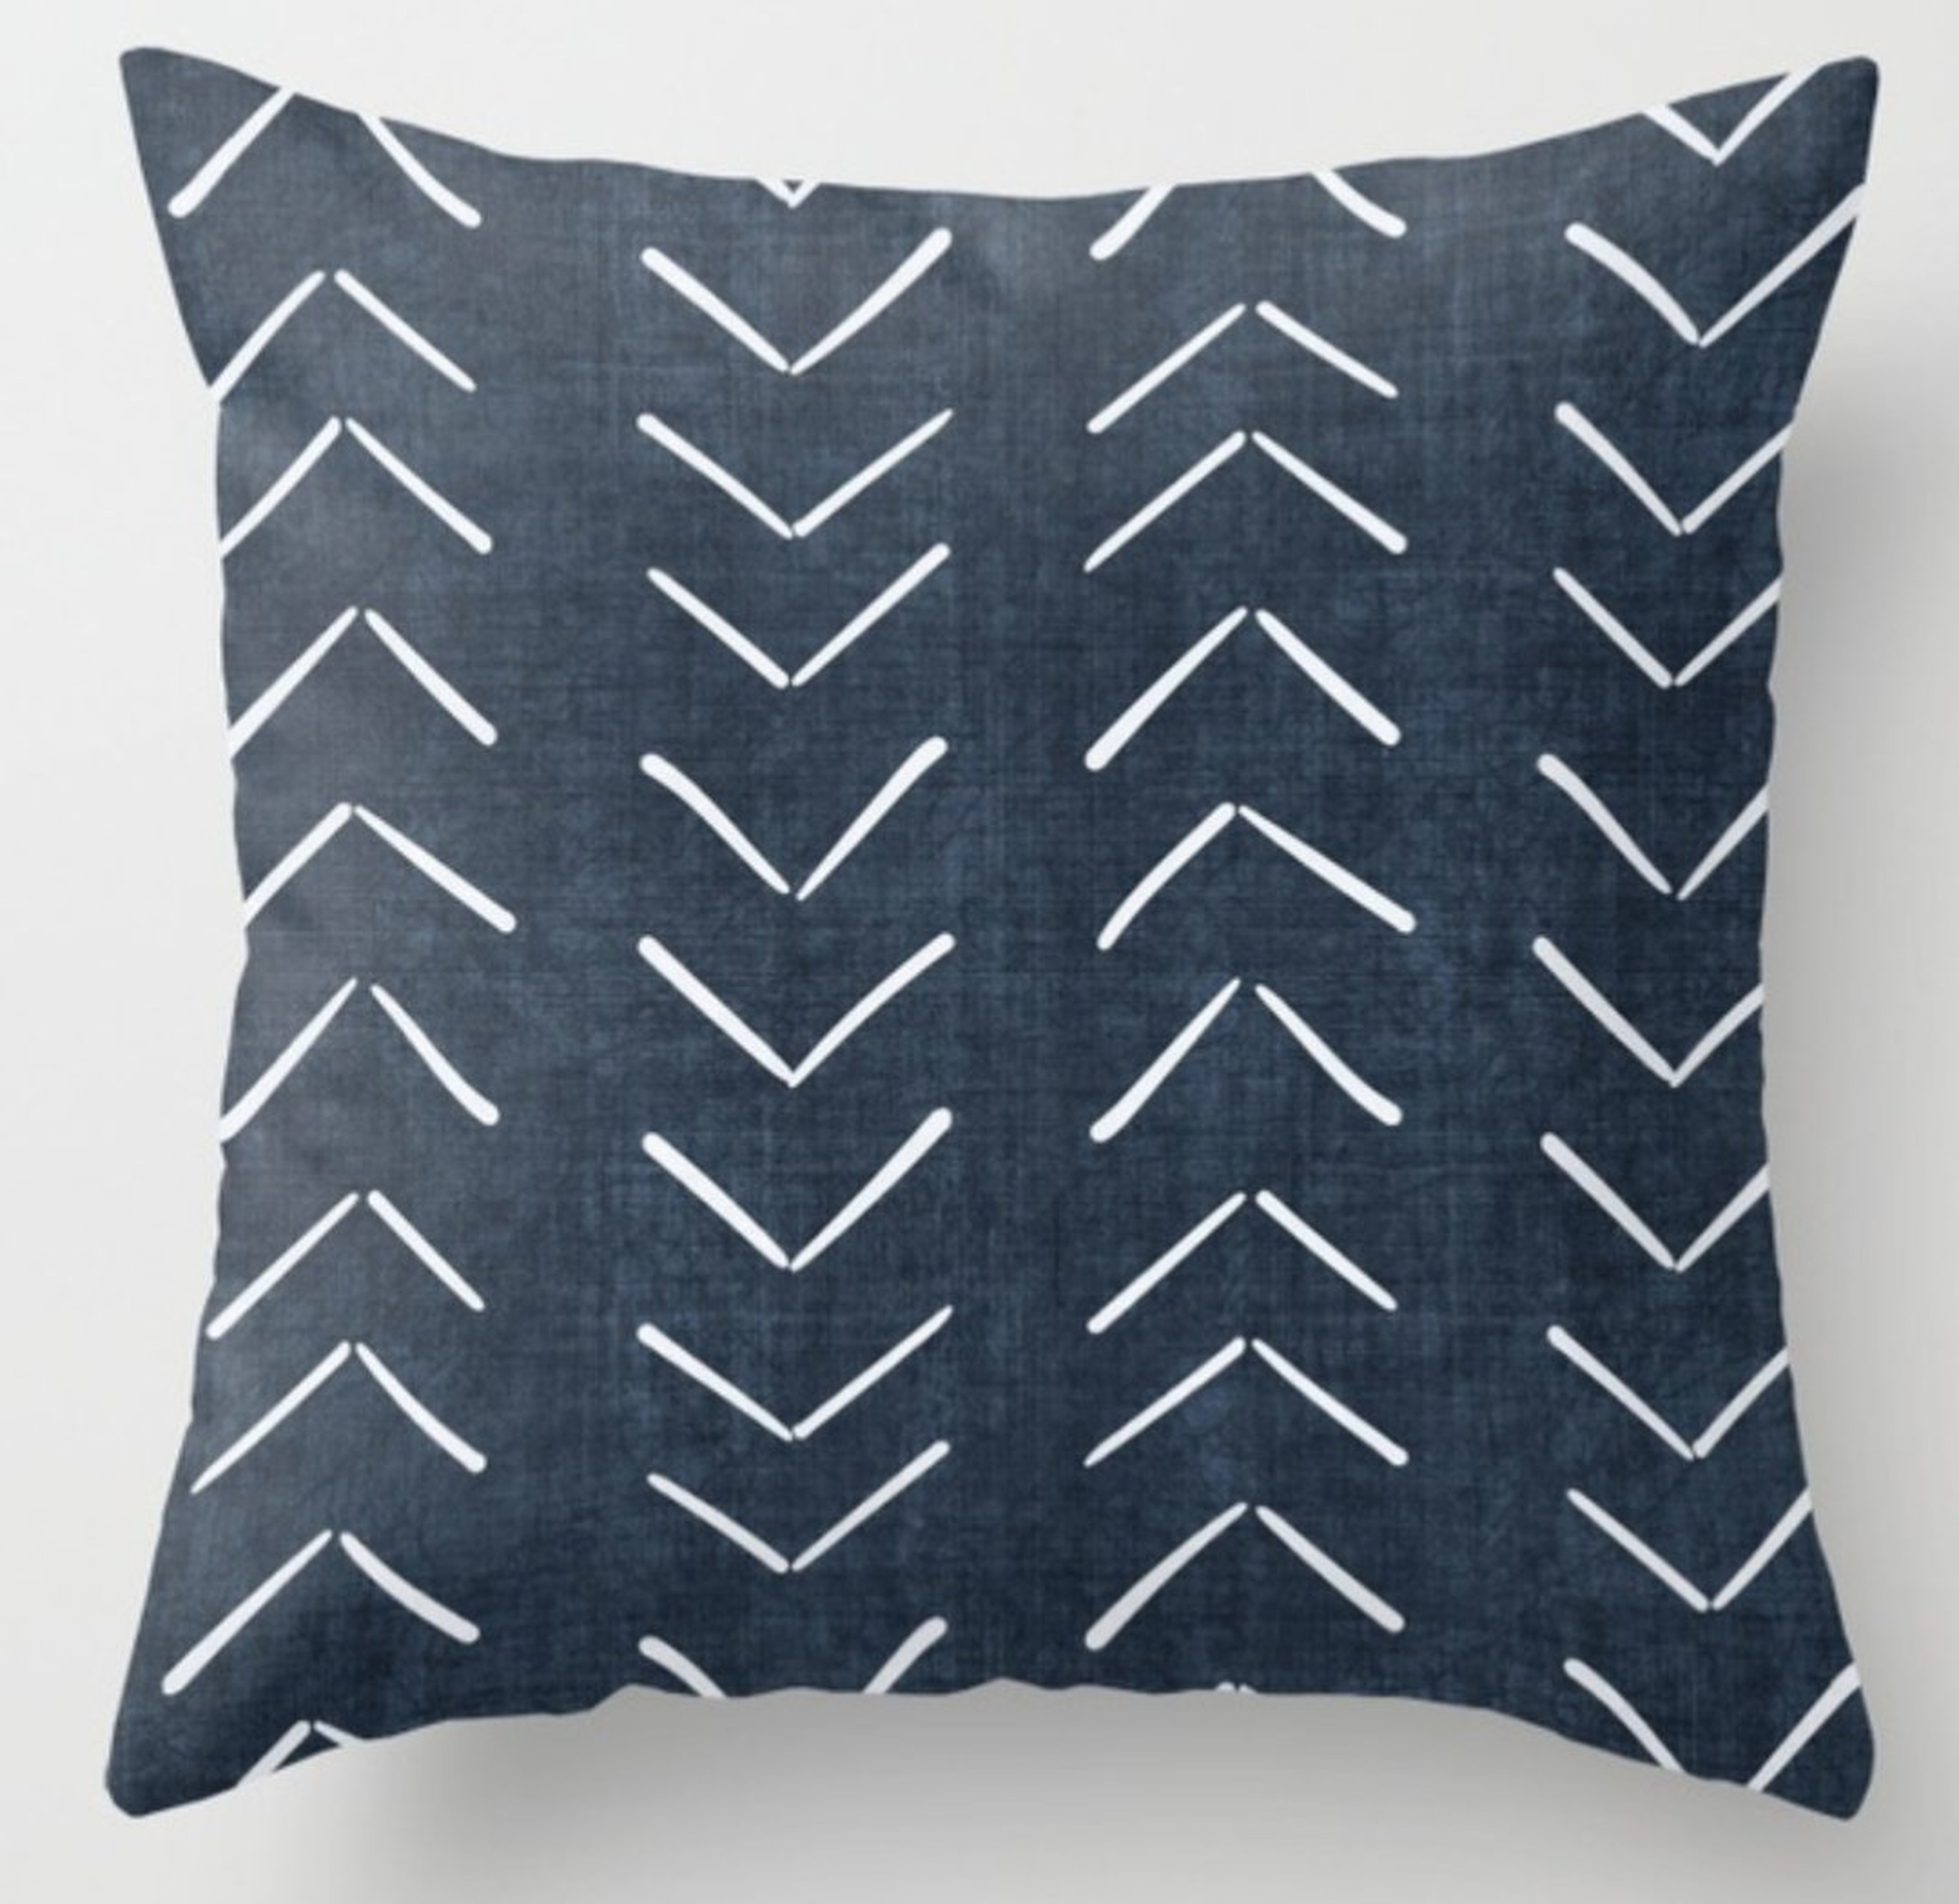 Mud Cloth Big Arrows in Navy  - 18" x 18" - with insert - Society6